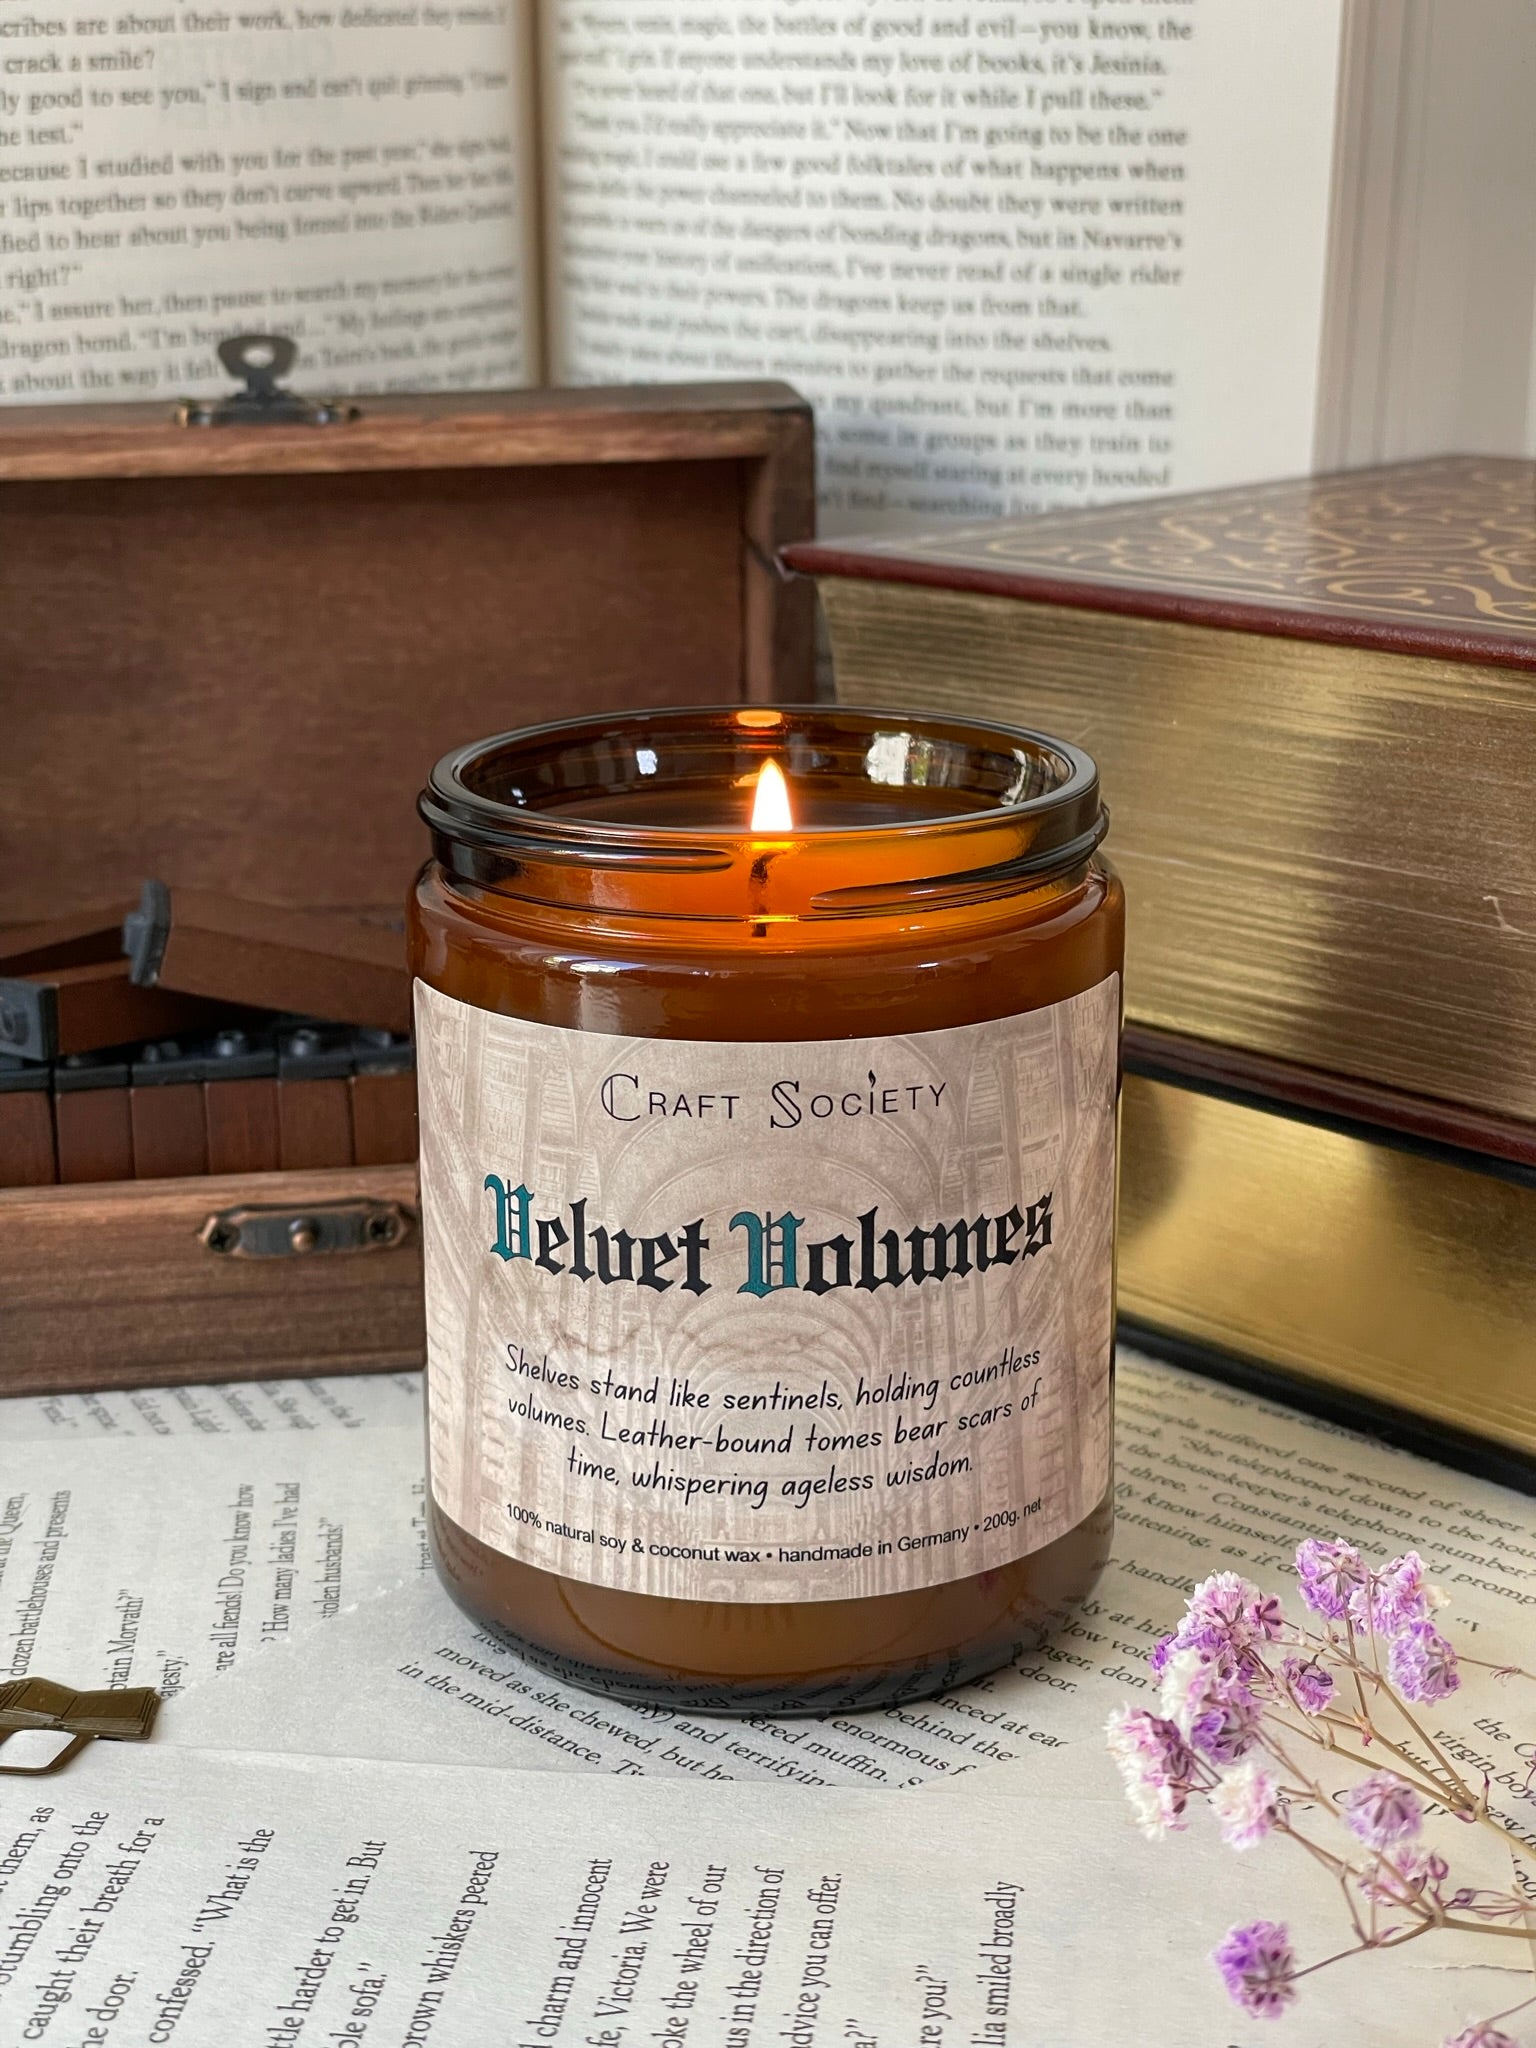 A burning scented candle in an amber jar on a decorated background with books and texts